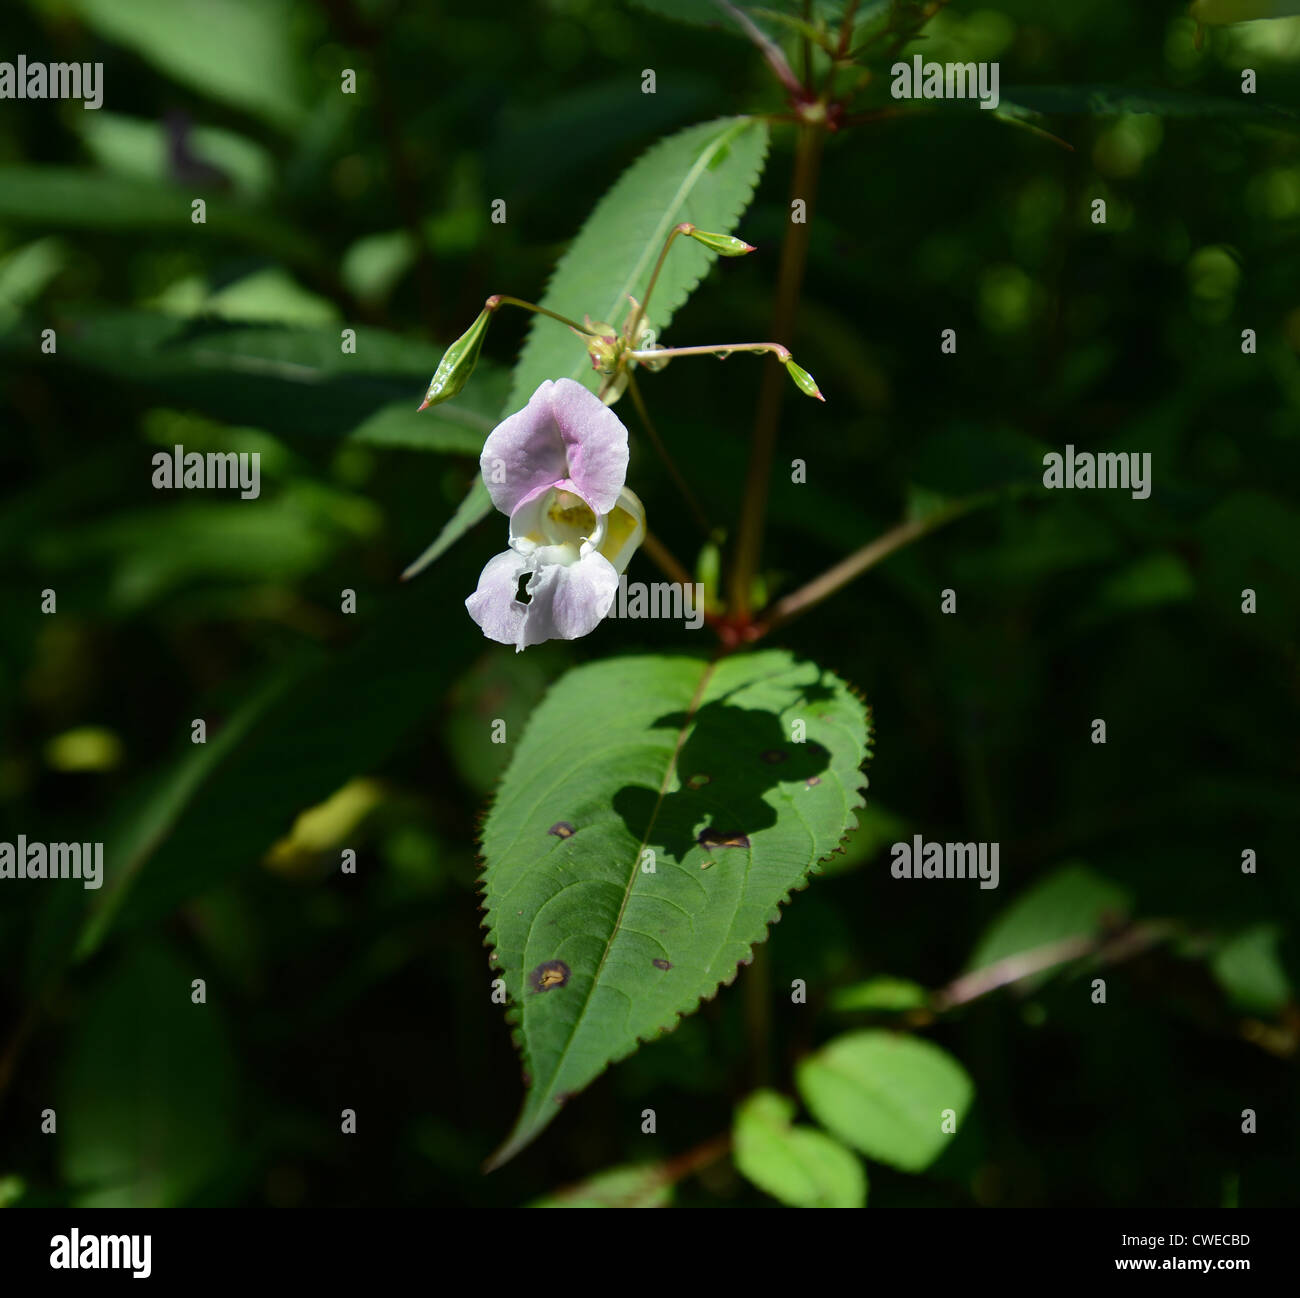 The Himalayan Balsam weed flower and seed heads Stock Photo